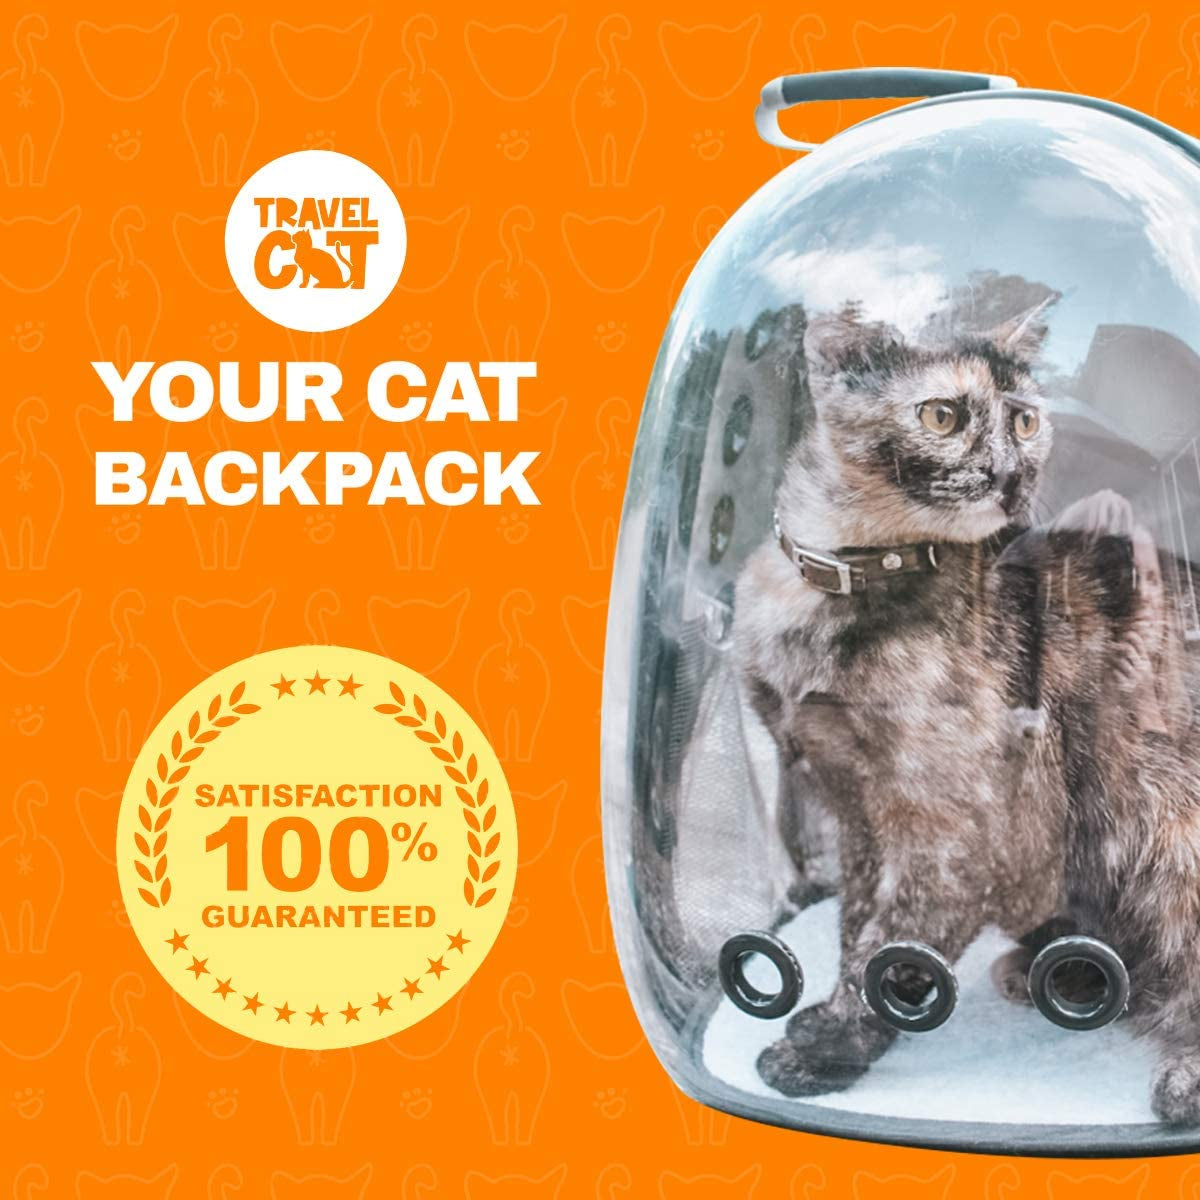 Carrier Bag - Premium Transparent Bubble Capsule Pet Carriers for Small Cats, Kitten, Carry - Green Voyager Airline Approved Backpacks for Travel, Hiking, Walking, Outdoor